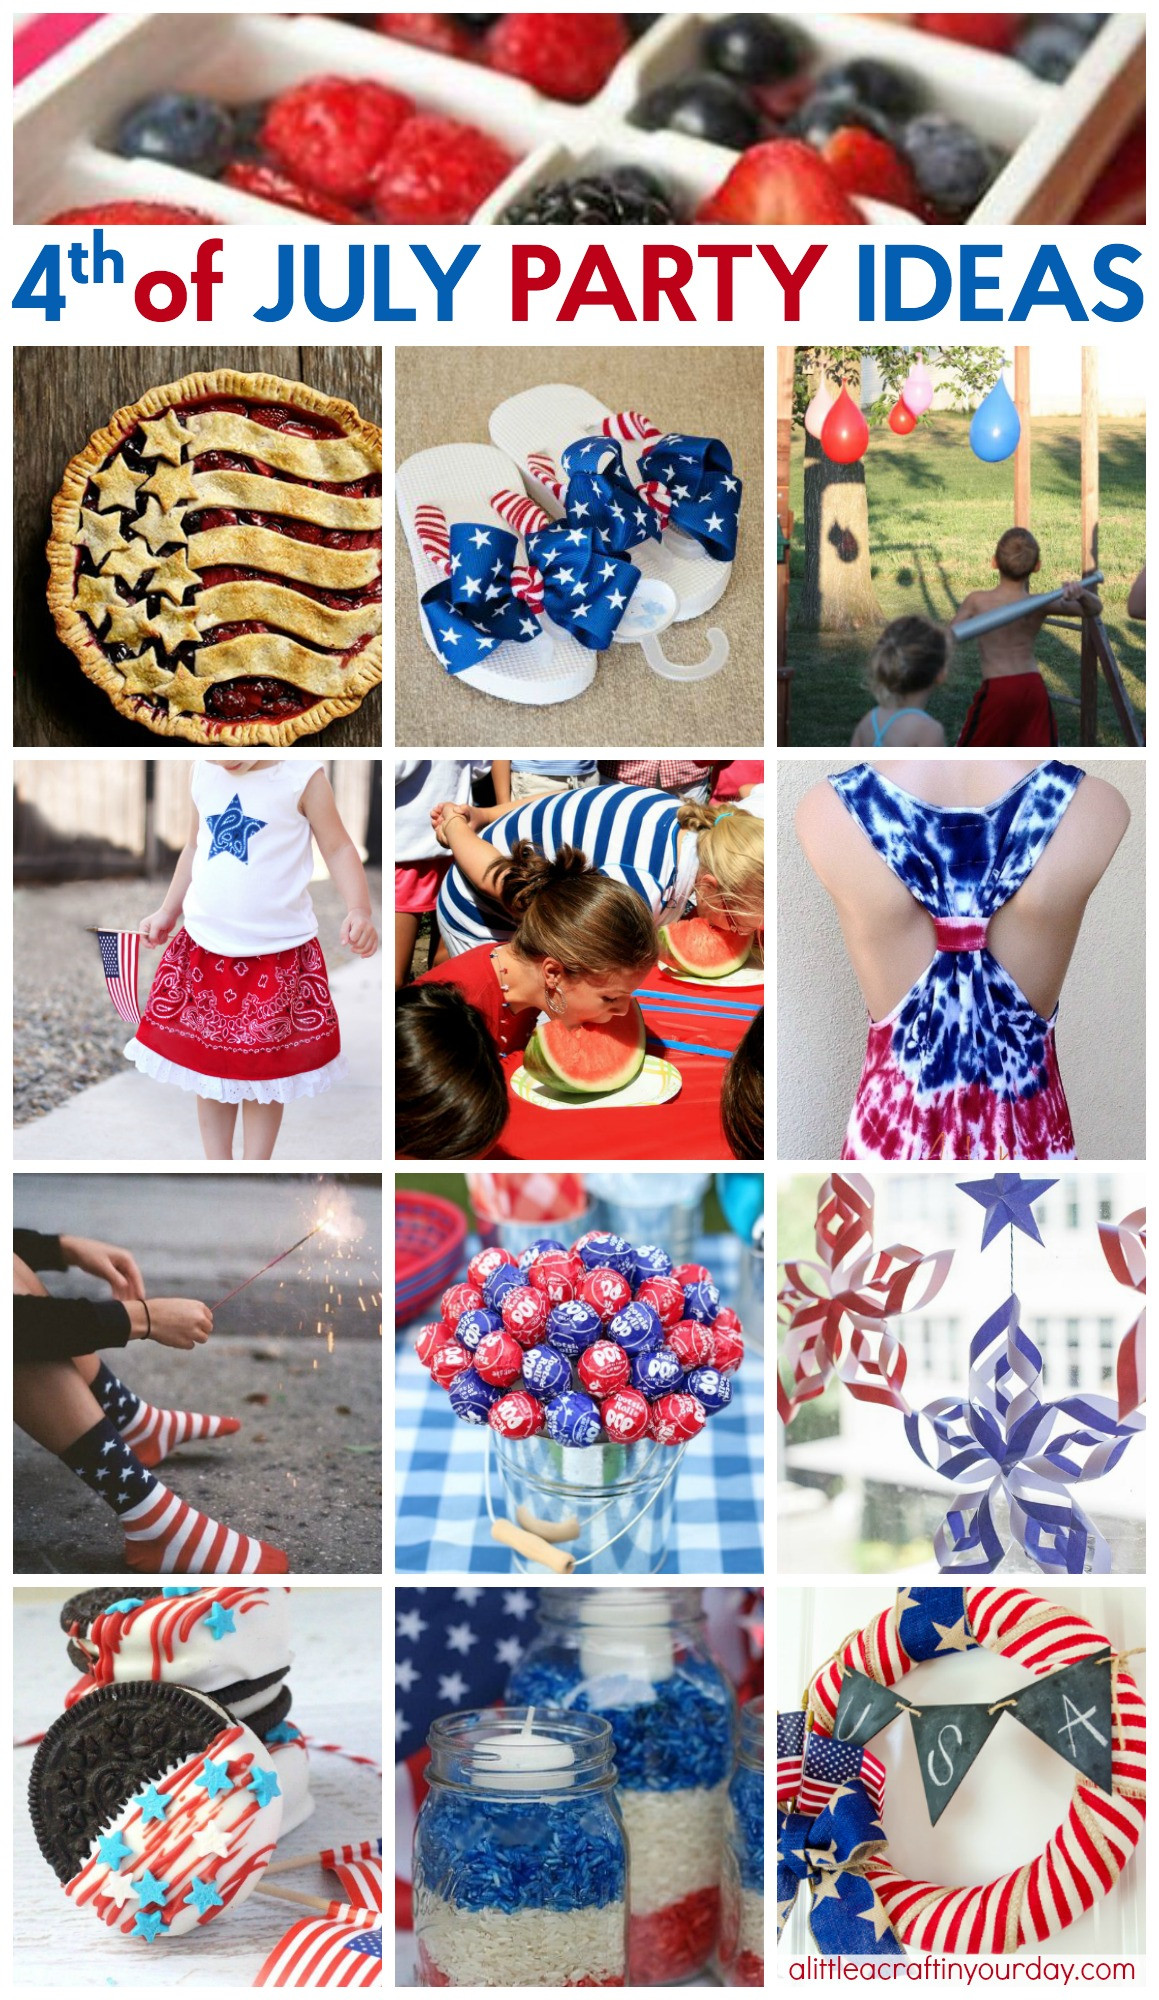 4th Of July Birthday Ideas
 44 Way Cool Fourth of July Party Ideas A Little Craft In